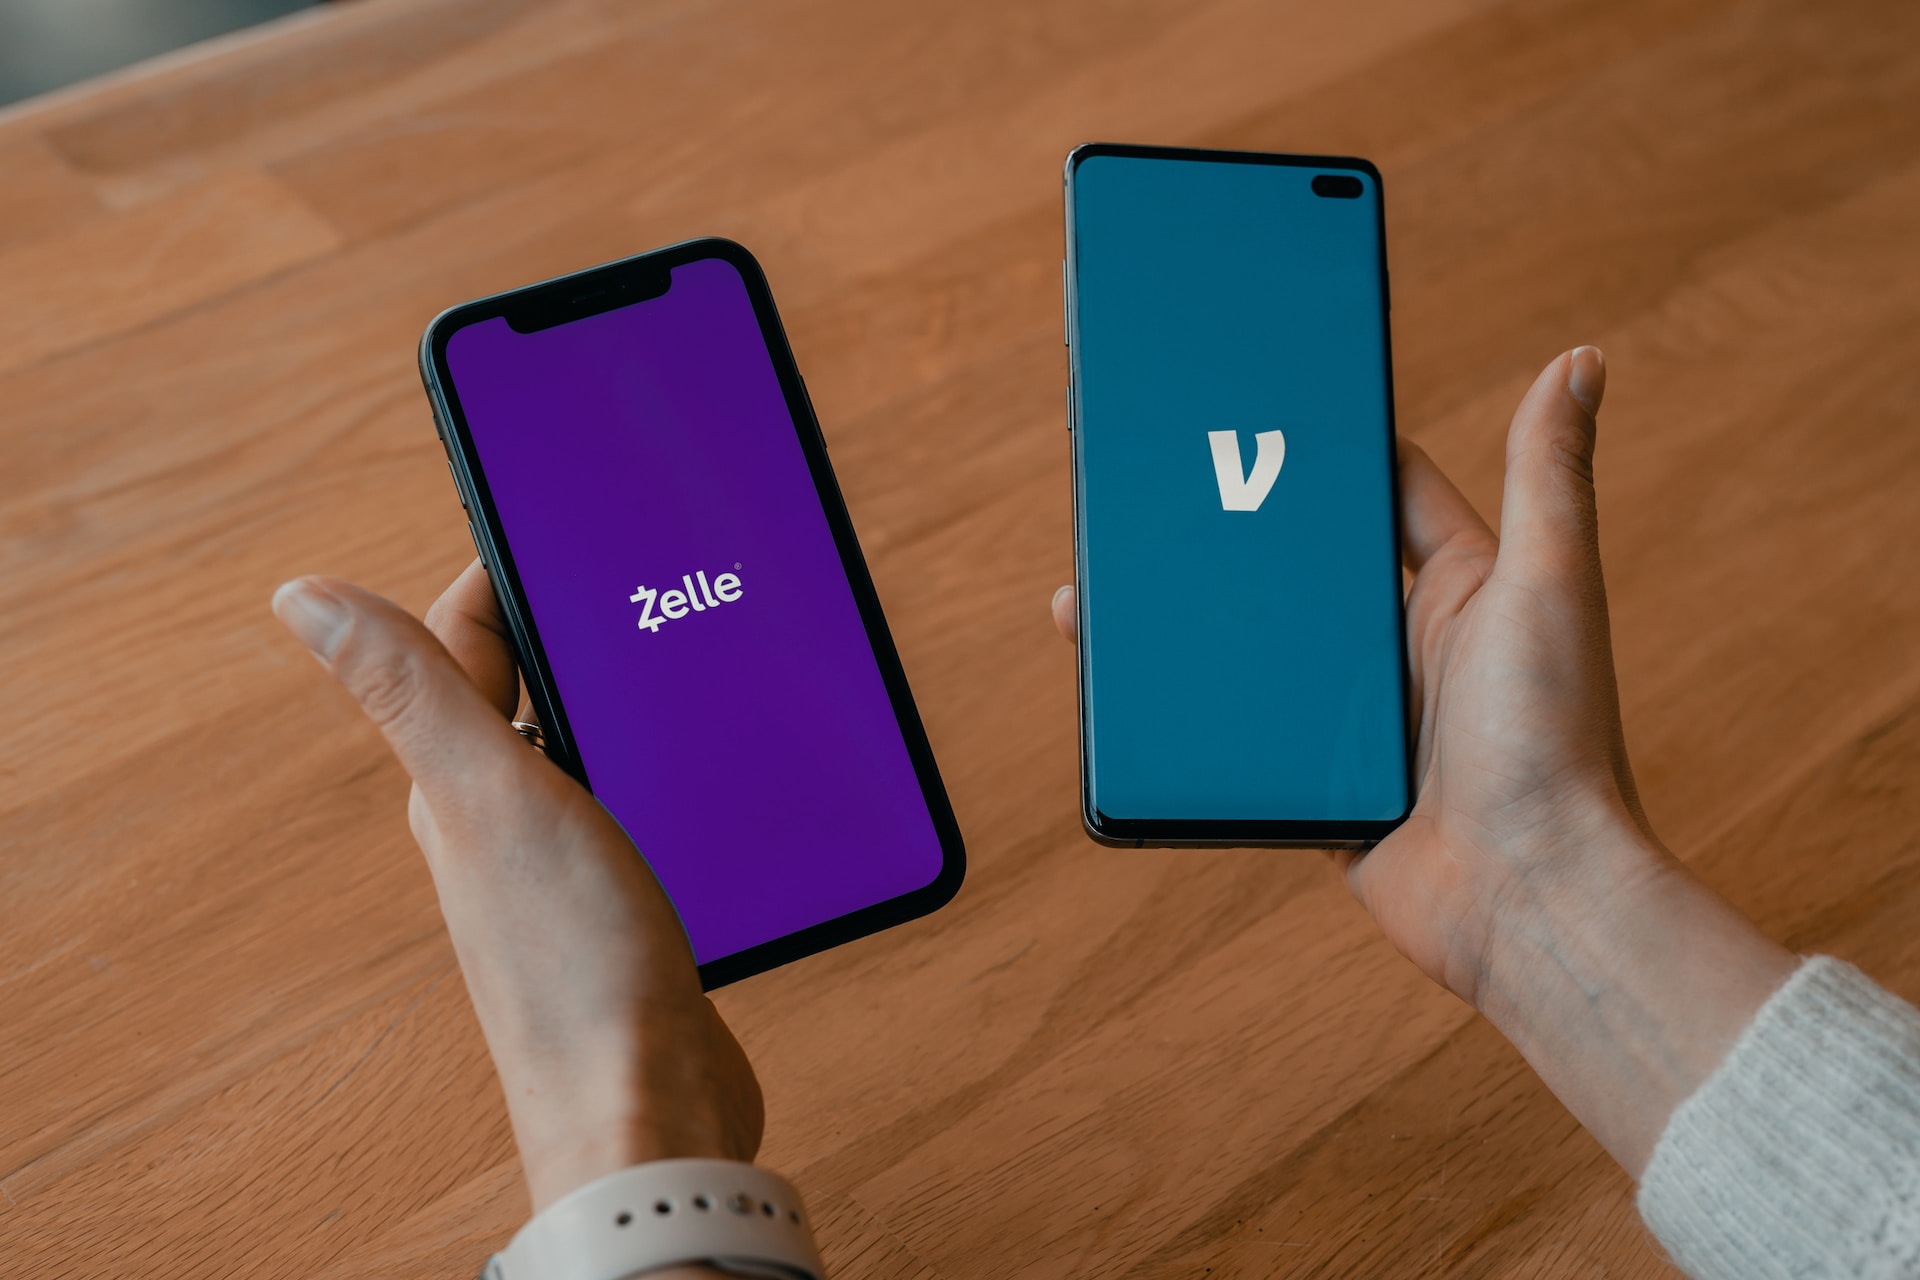 A left hand with a smartphone with ‘Zelle’ on the screen and a right hand with a smartphone with the Venmo ‘V’ logo